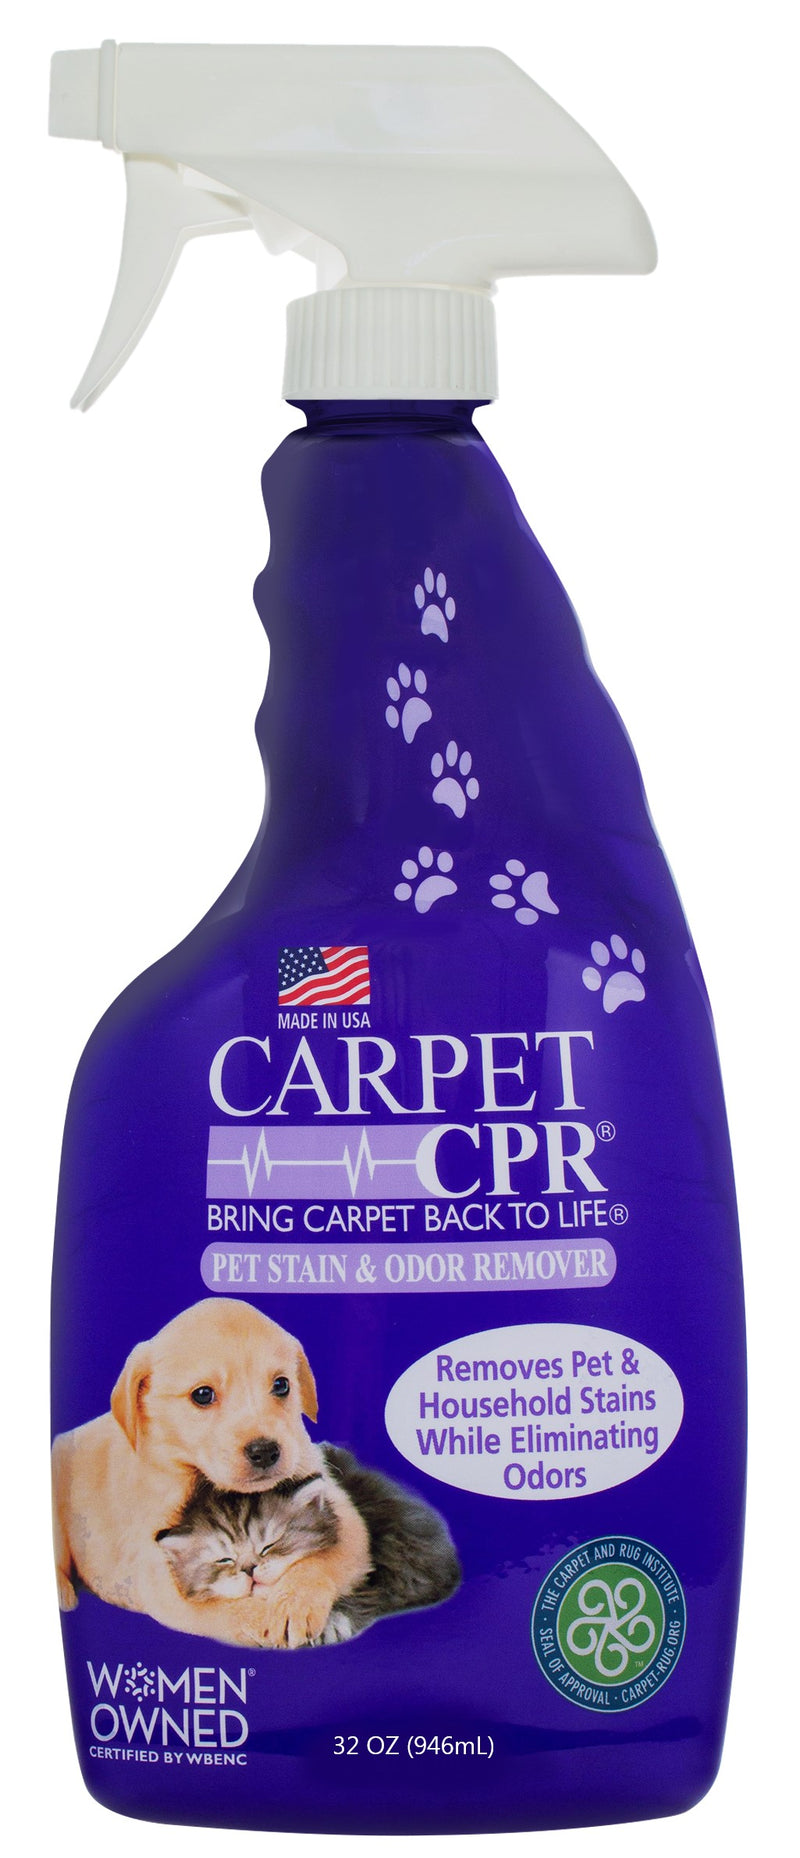 People are loving this affordable carpet stain remover